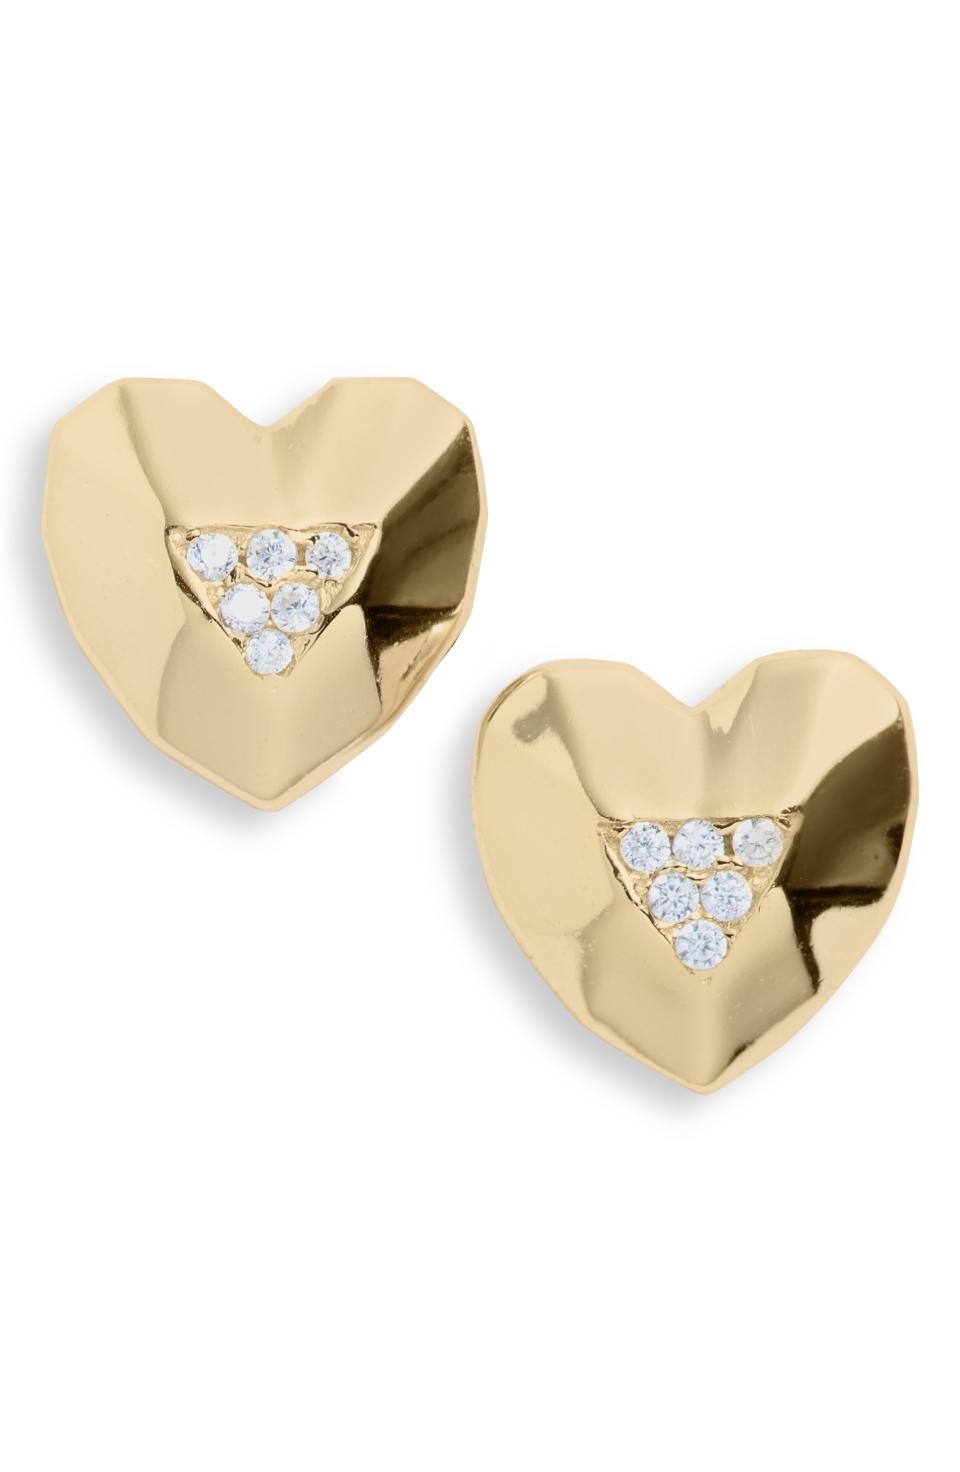 15) A Pair of Romantic Heart-Shaped Studs